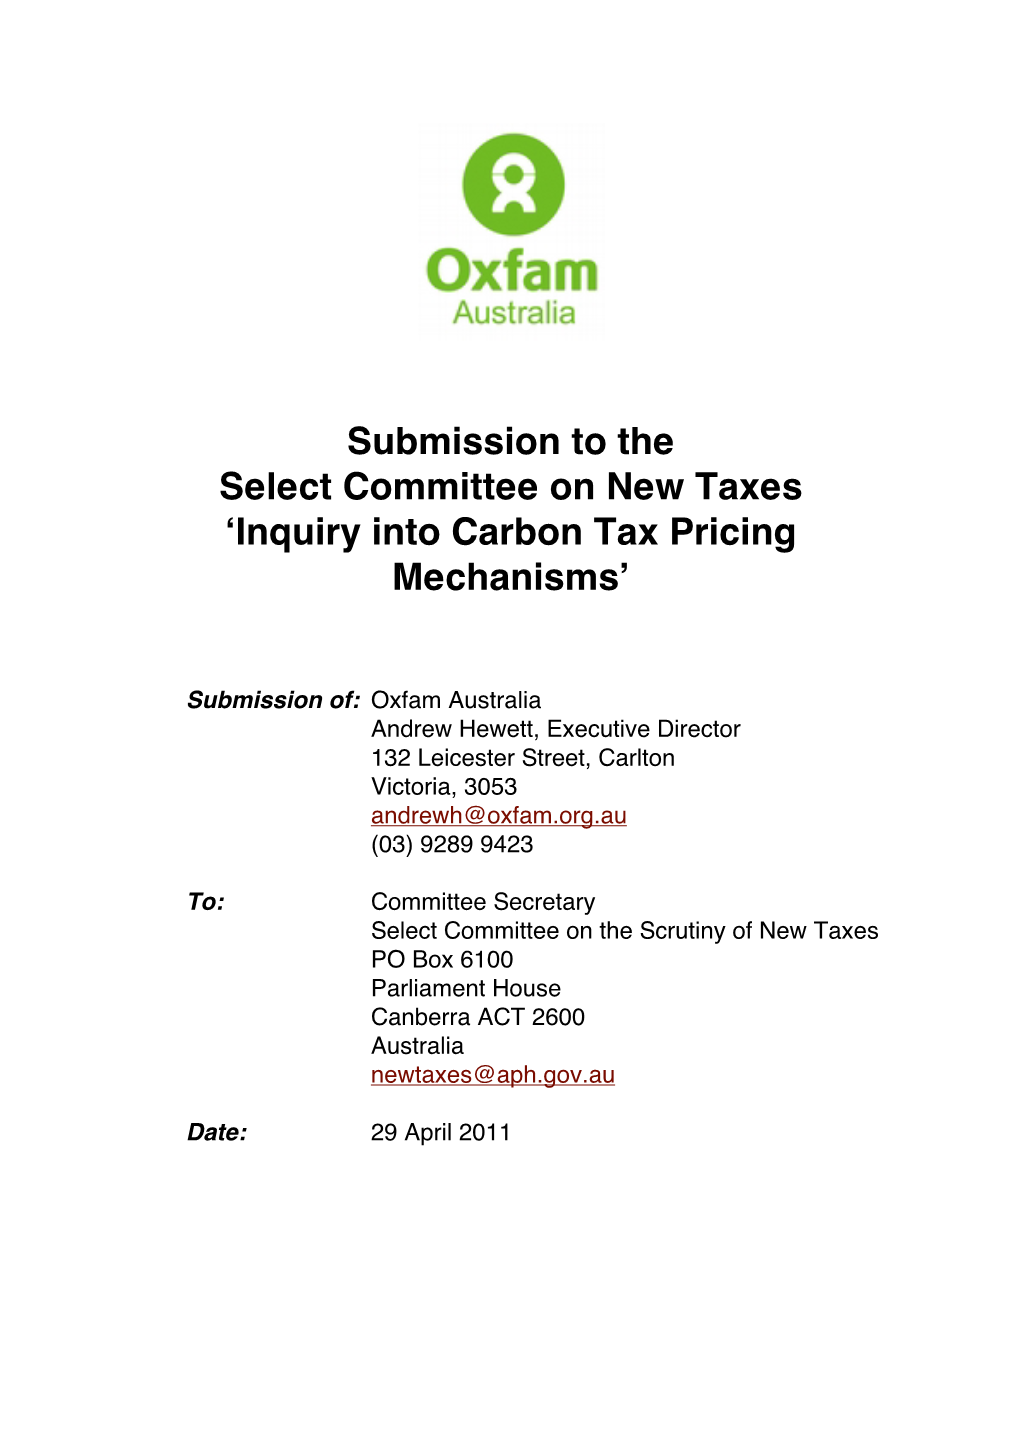 Submission to the Select Committee on New Taxes ʻinquiry Into Carbon Tax Pricing Mechanismsʼ